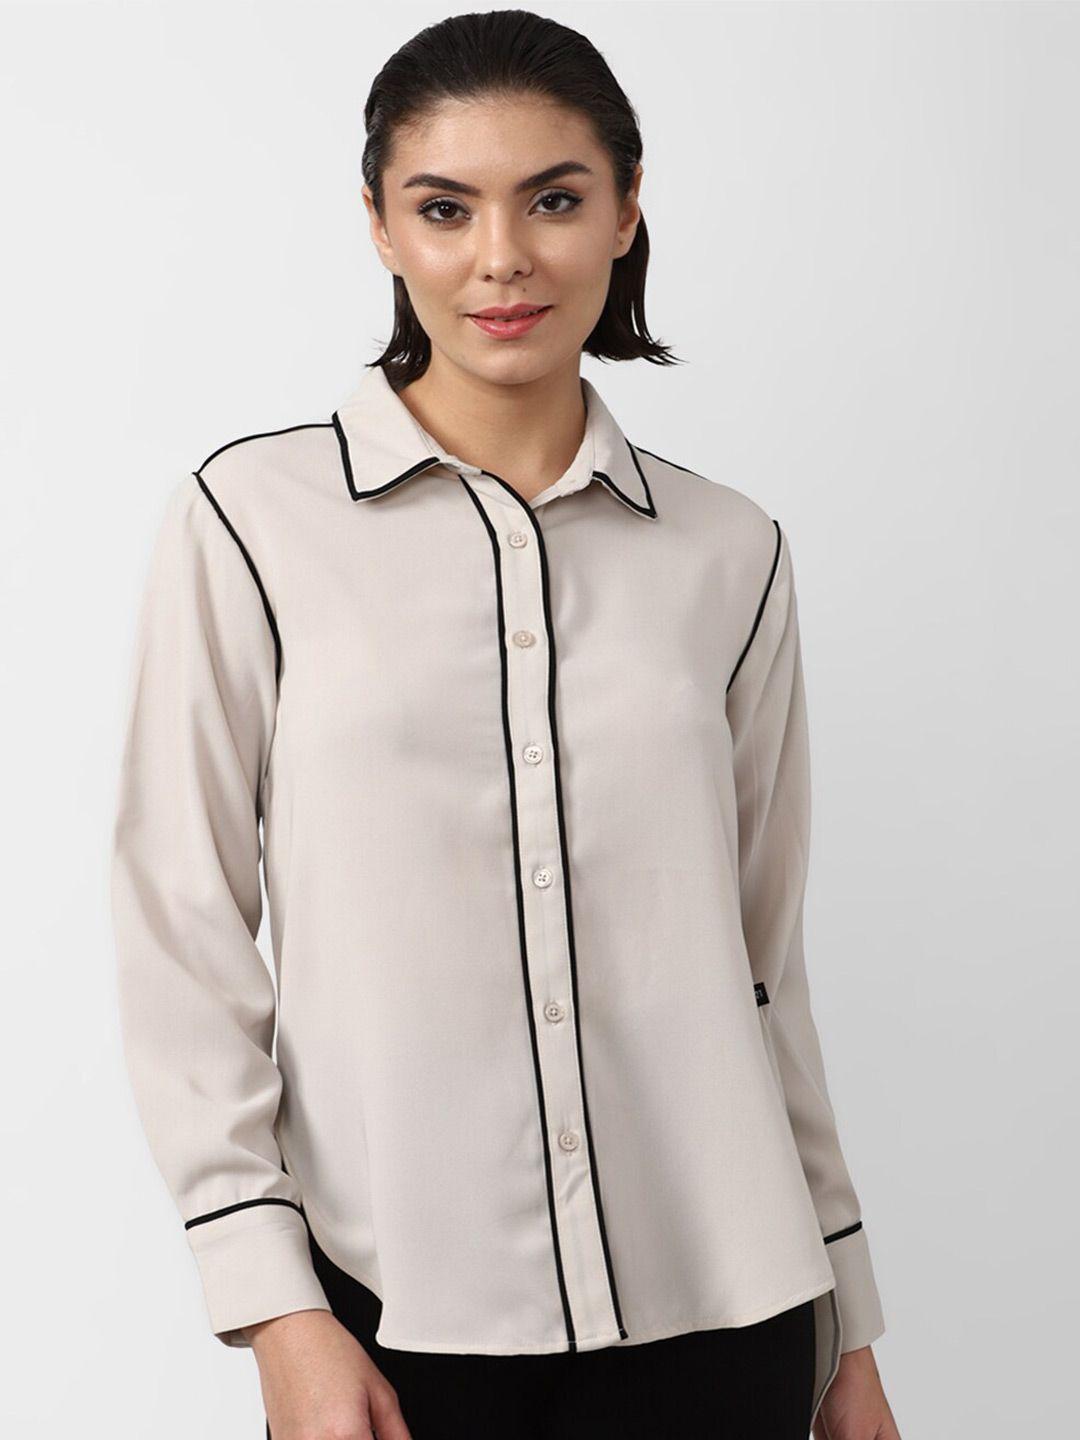 forever-21-women-cream-coloured-solid-casual-shirt